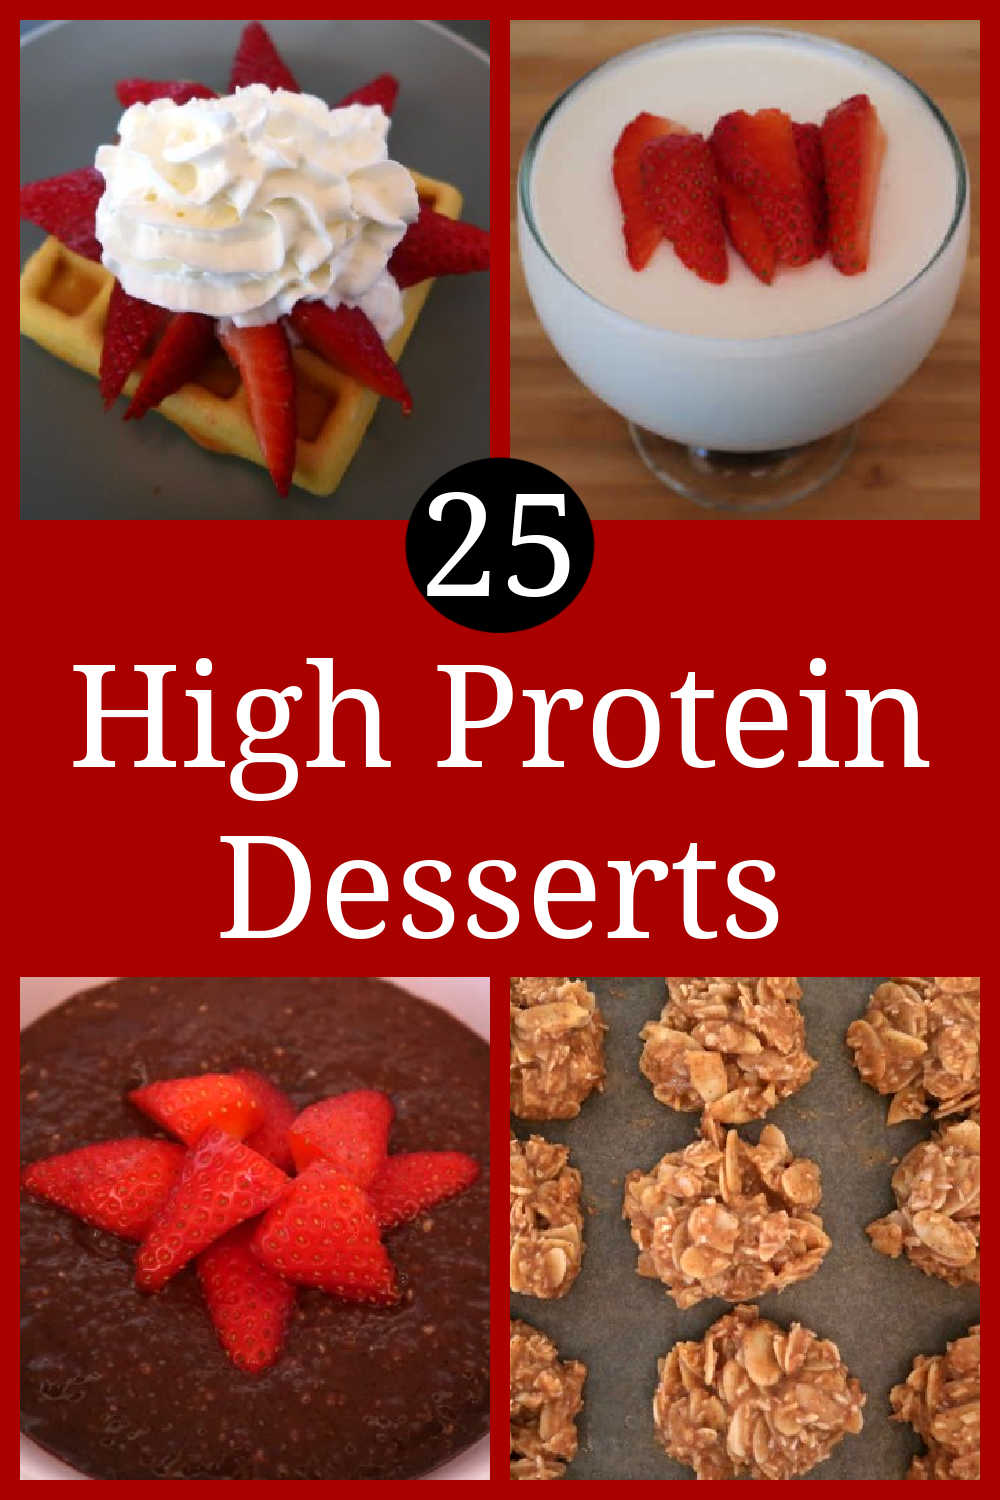 25 High Protein Desserts - How to make the best easy dessert recipes that are low in carbs, packed with healthy protein and will satisfy your sweet tooth.